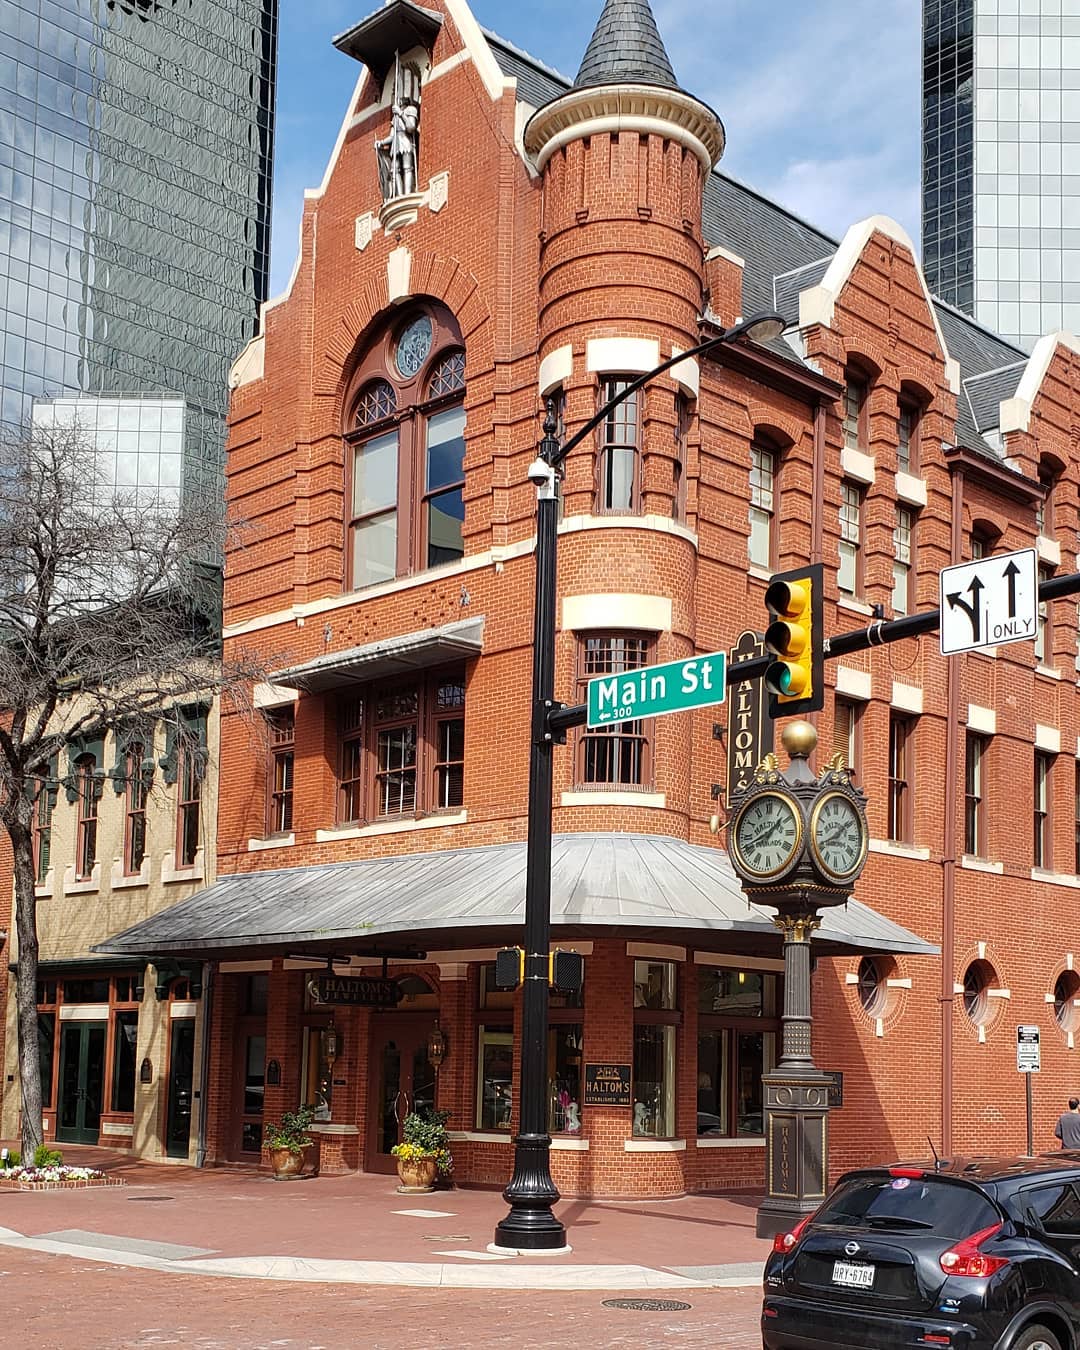 Large, church style red brick building sitting on main street Fort Worth. Photo by Instagram user @apsergiopessoa